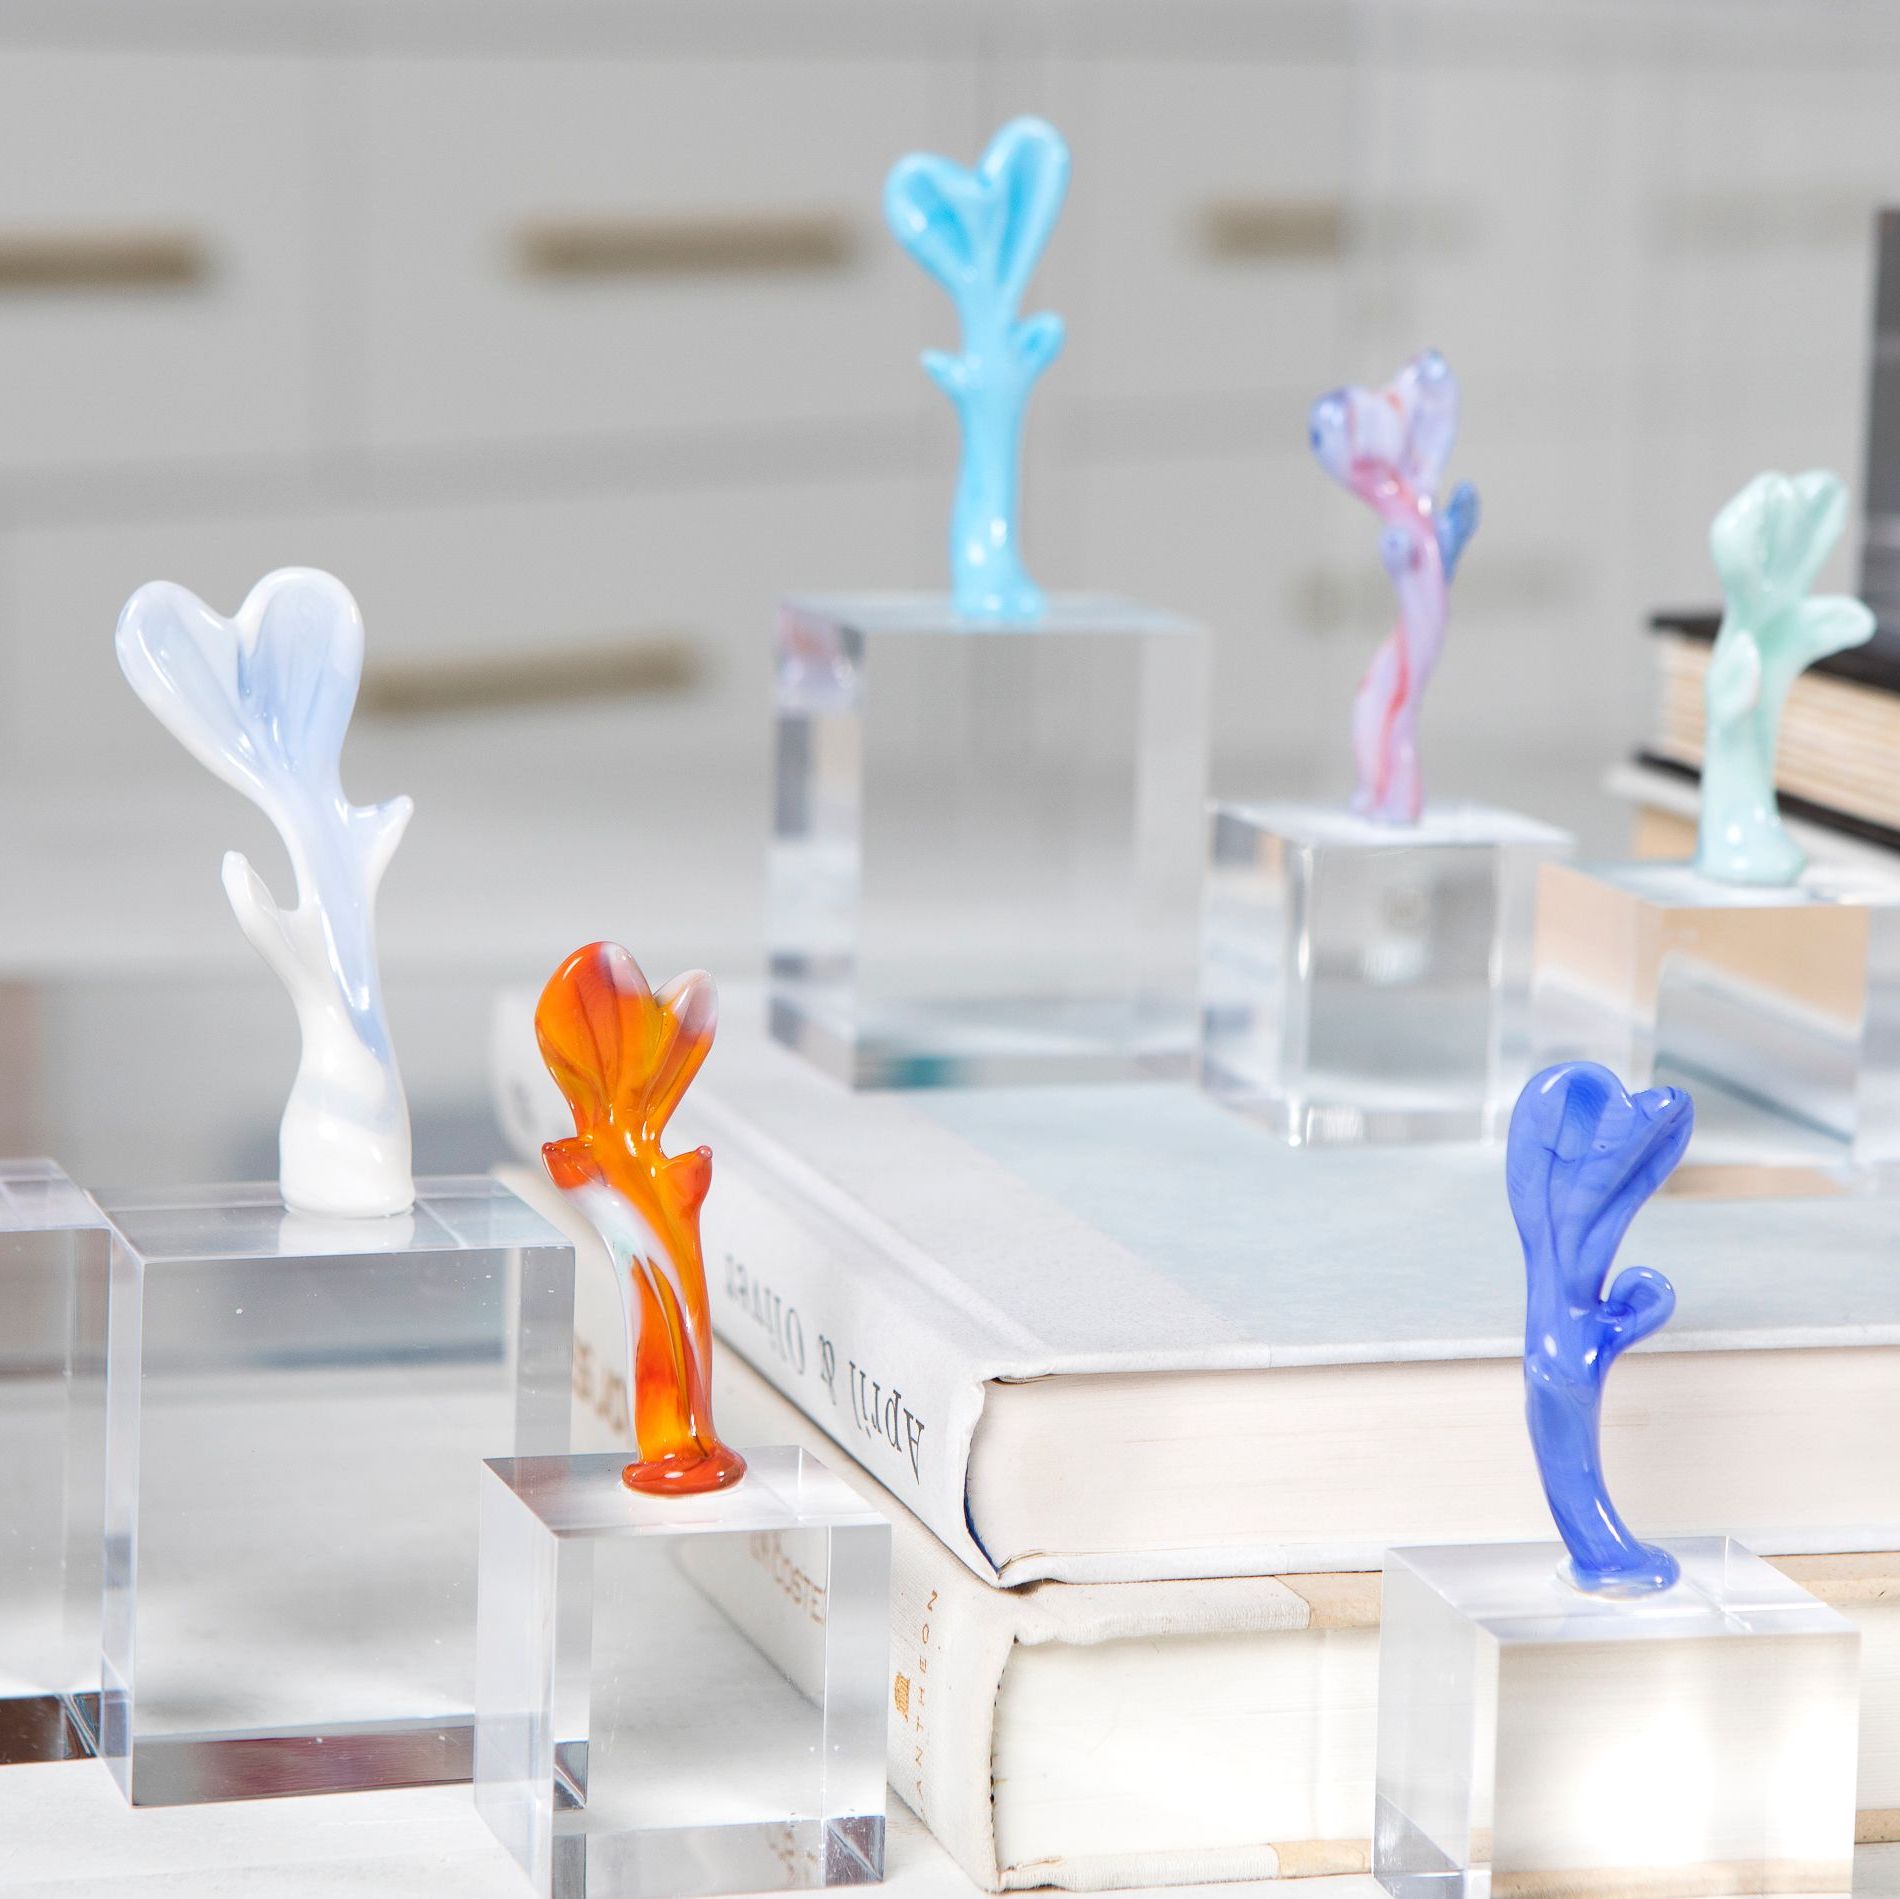 Collection of Hot-Sculpted Murano Glass Lume 'Hug' sculptures on Lucite Bases